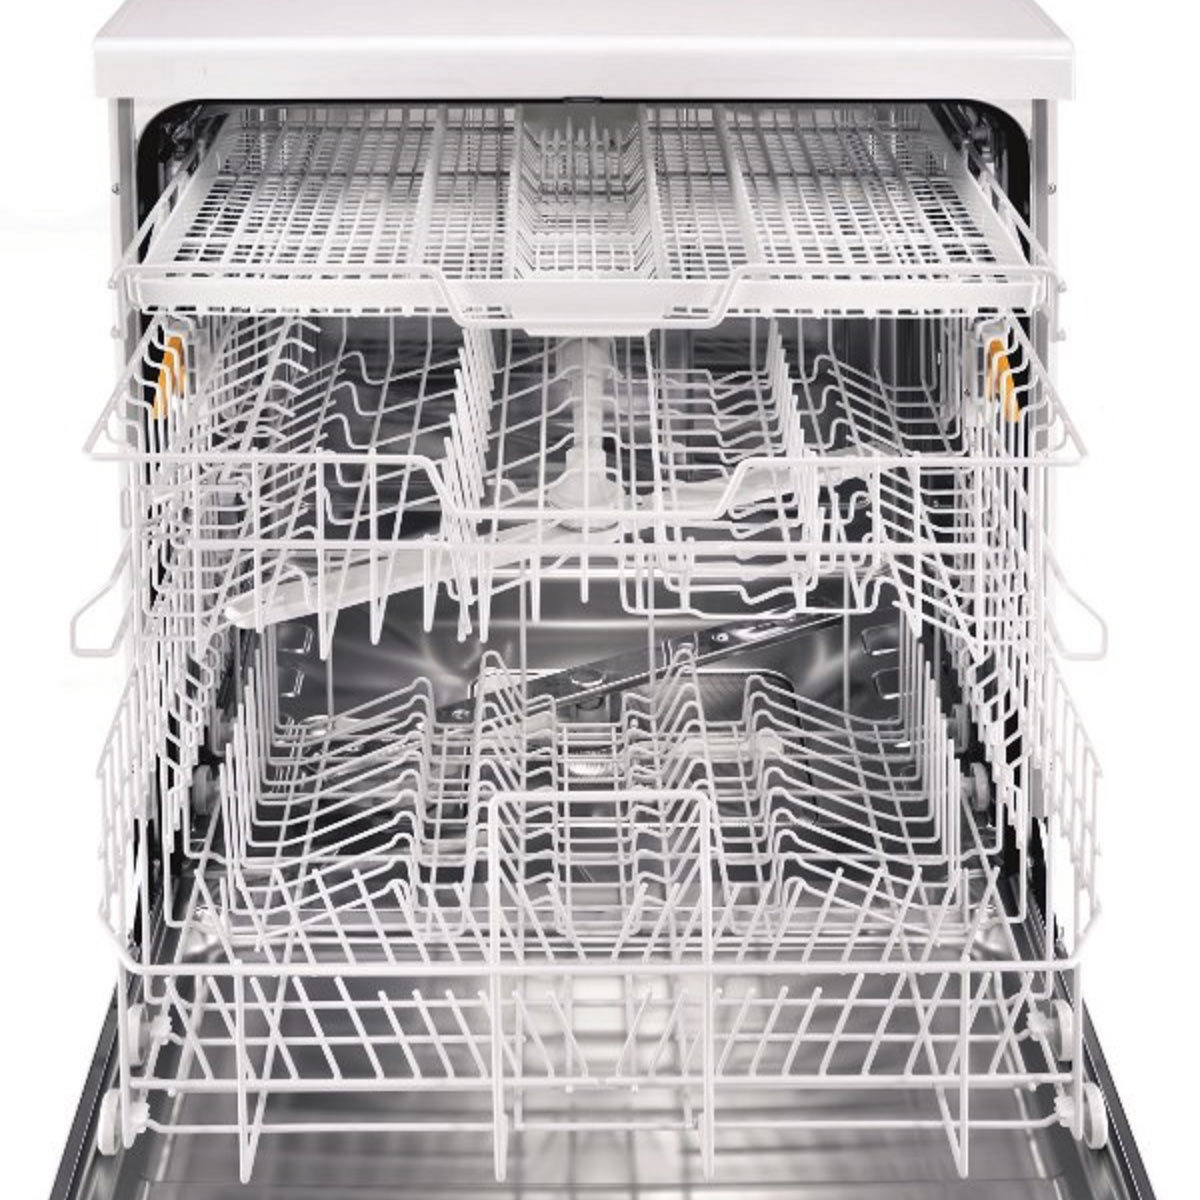 Miele G4203SC, 14 Place Settings Dishwasher A+ Rated in White